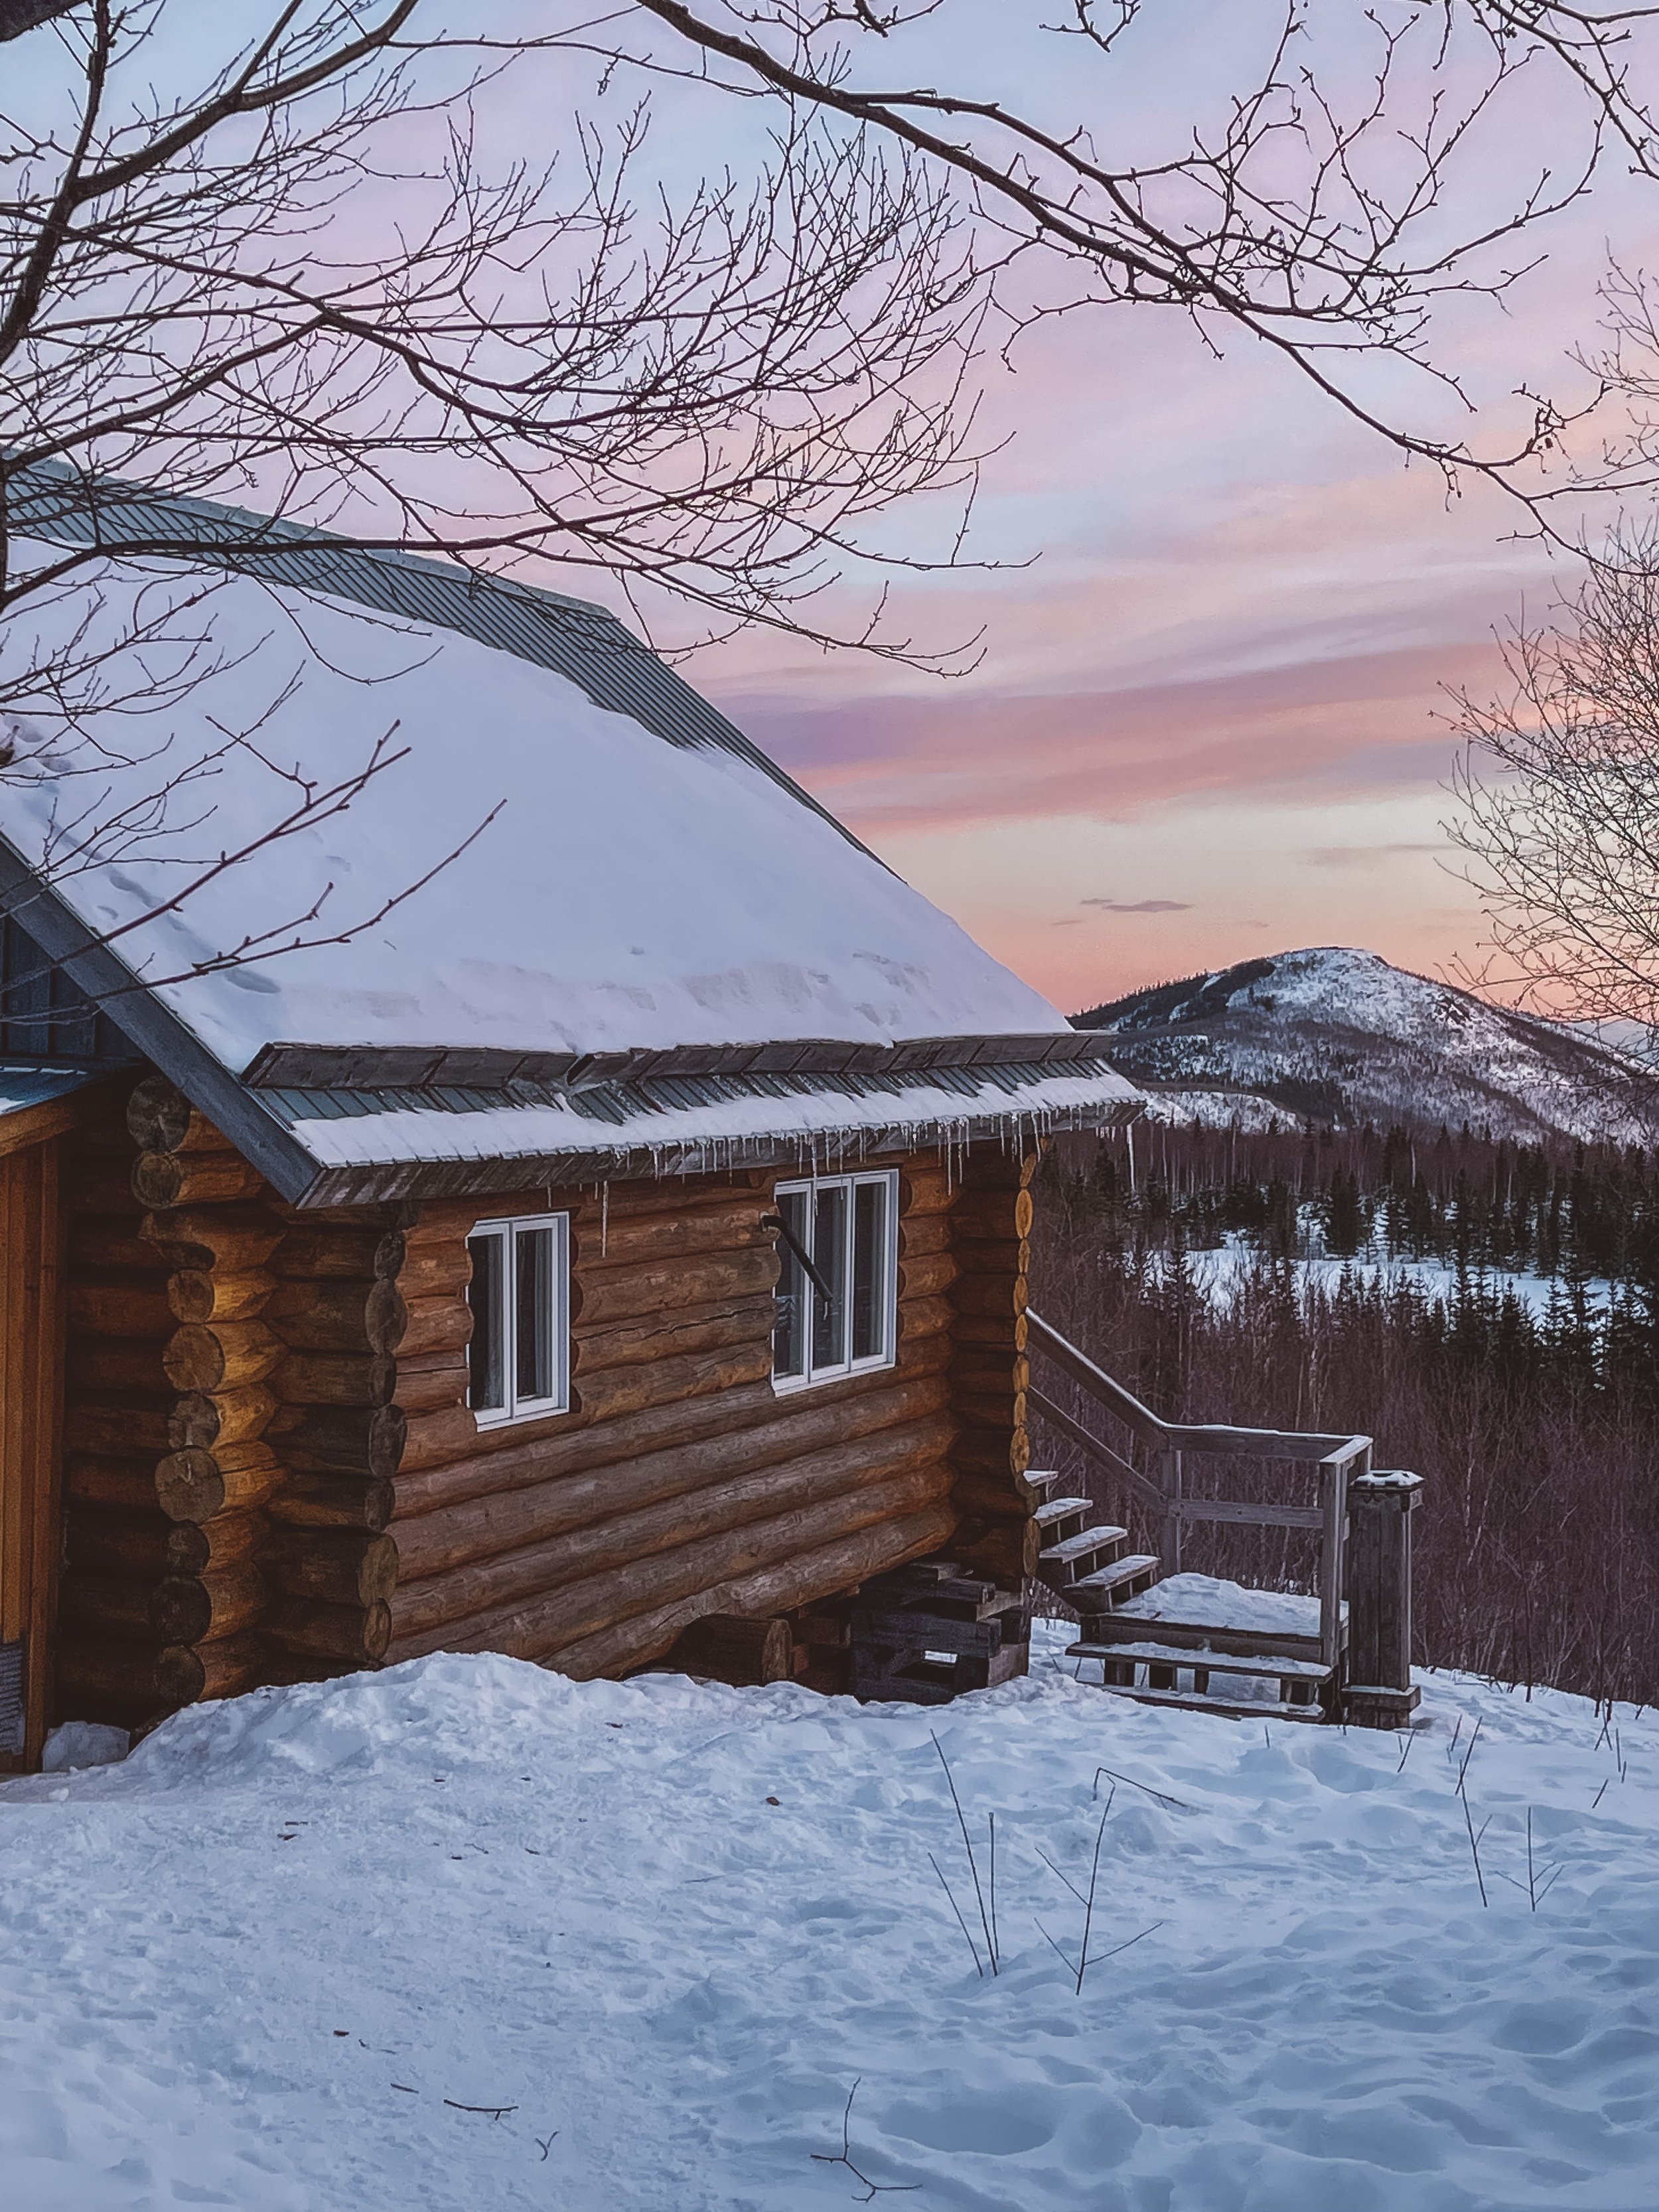 Pink skies and a winter cabin - Mount du Dôme - Charlevoix - Quebec - Canada